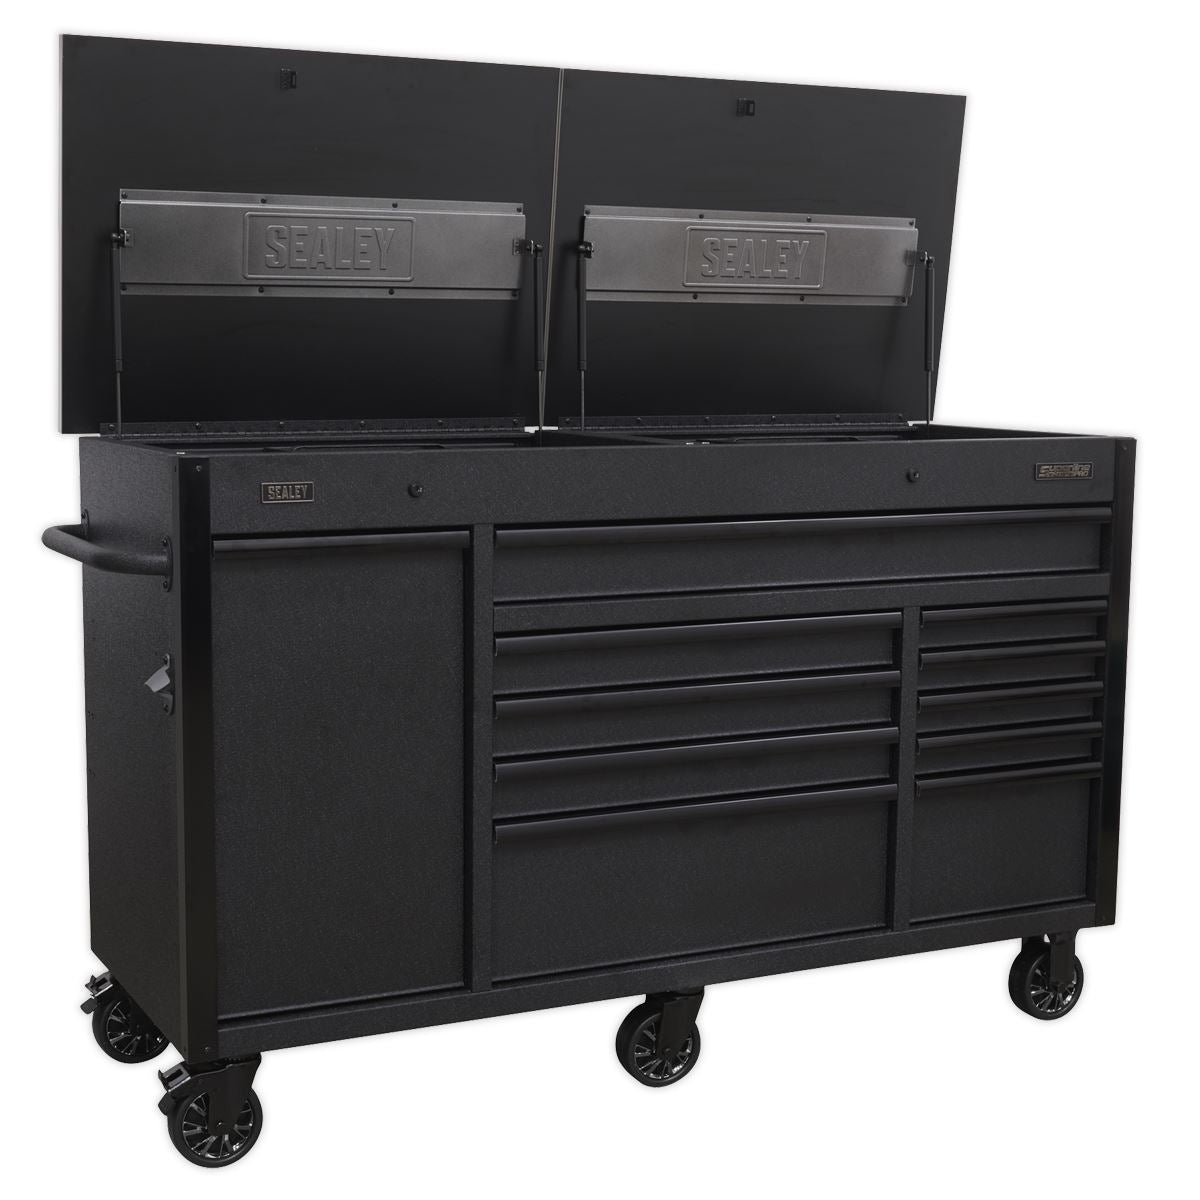 Sealey Superline Pro Mobile Tool Cabinet 1600mm with Power Tool Charging Drawer